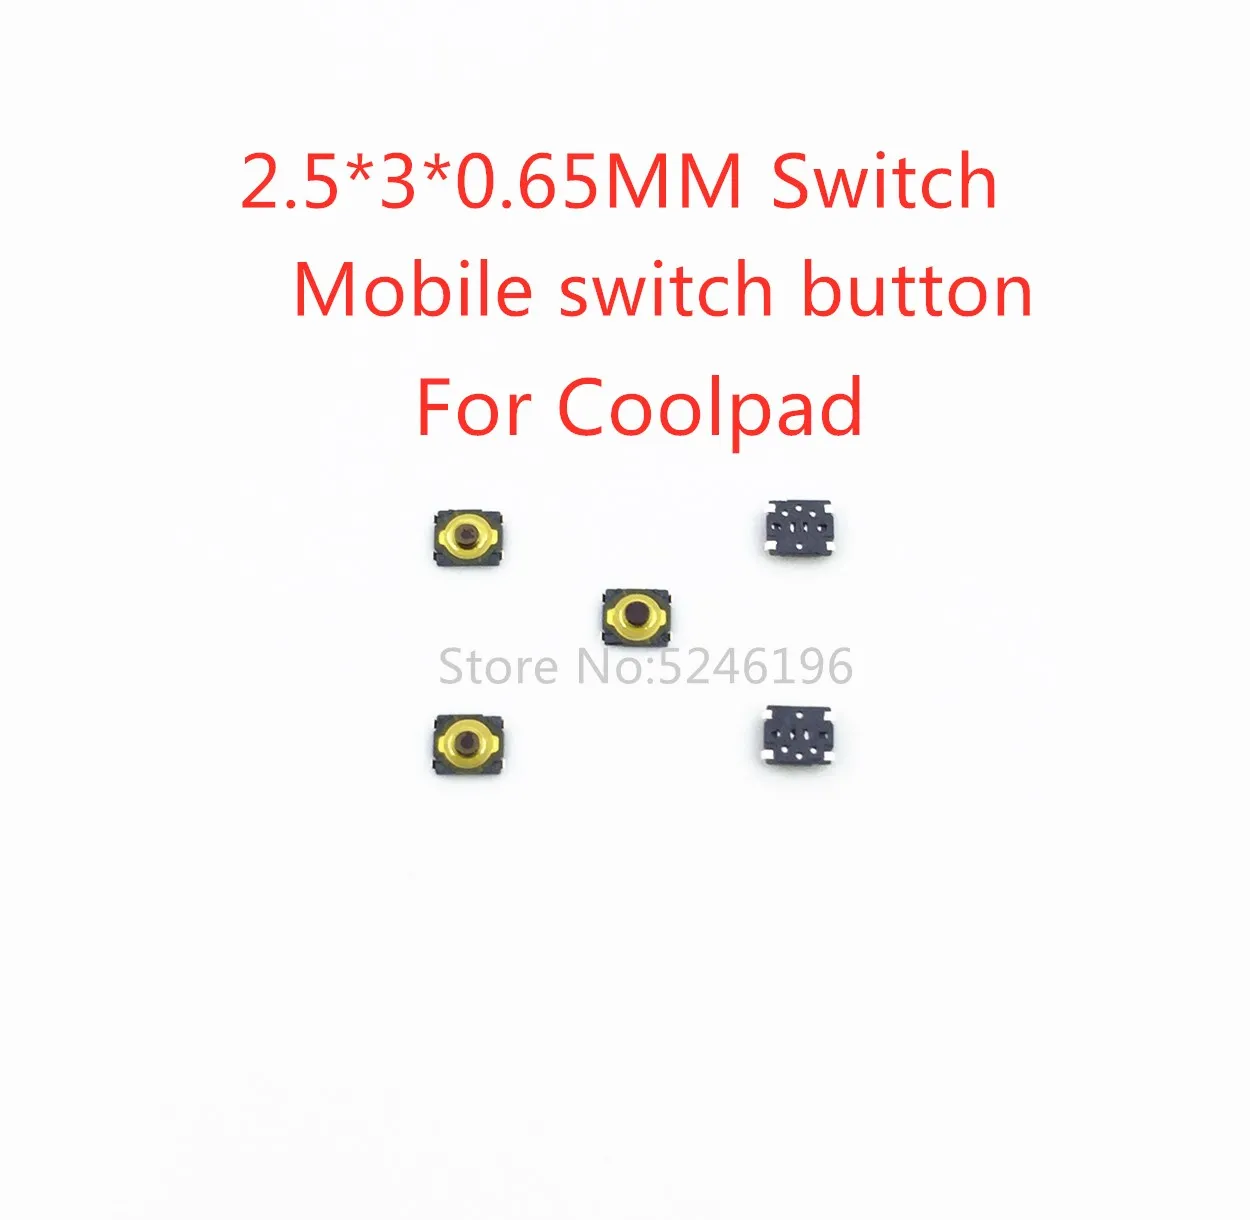 

10-100pcs 2.5*3*0.65MM 2.5x3x0.65MM For Coolpad Tactile Push Button Switch Tact 4 Pin Micro Switch SMD for Mobile Phone Camera